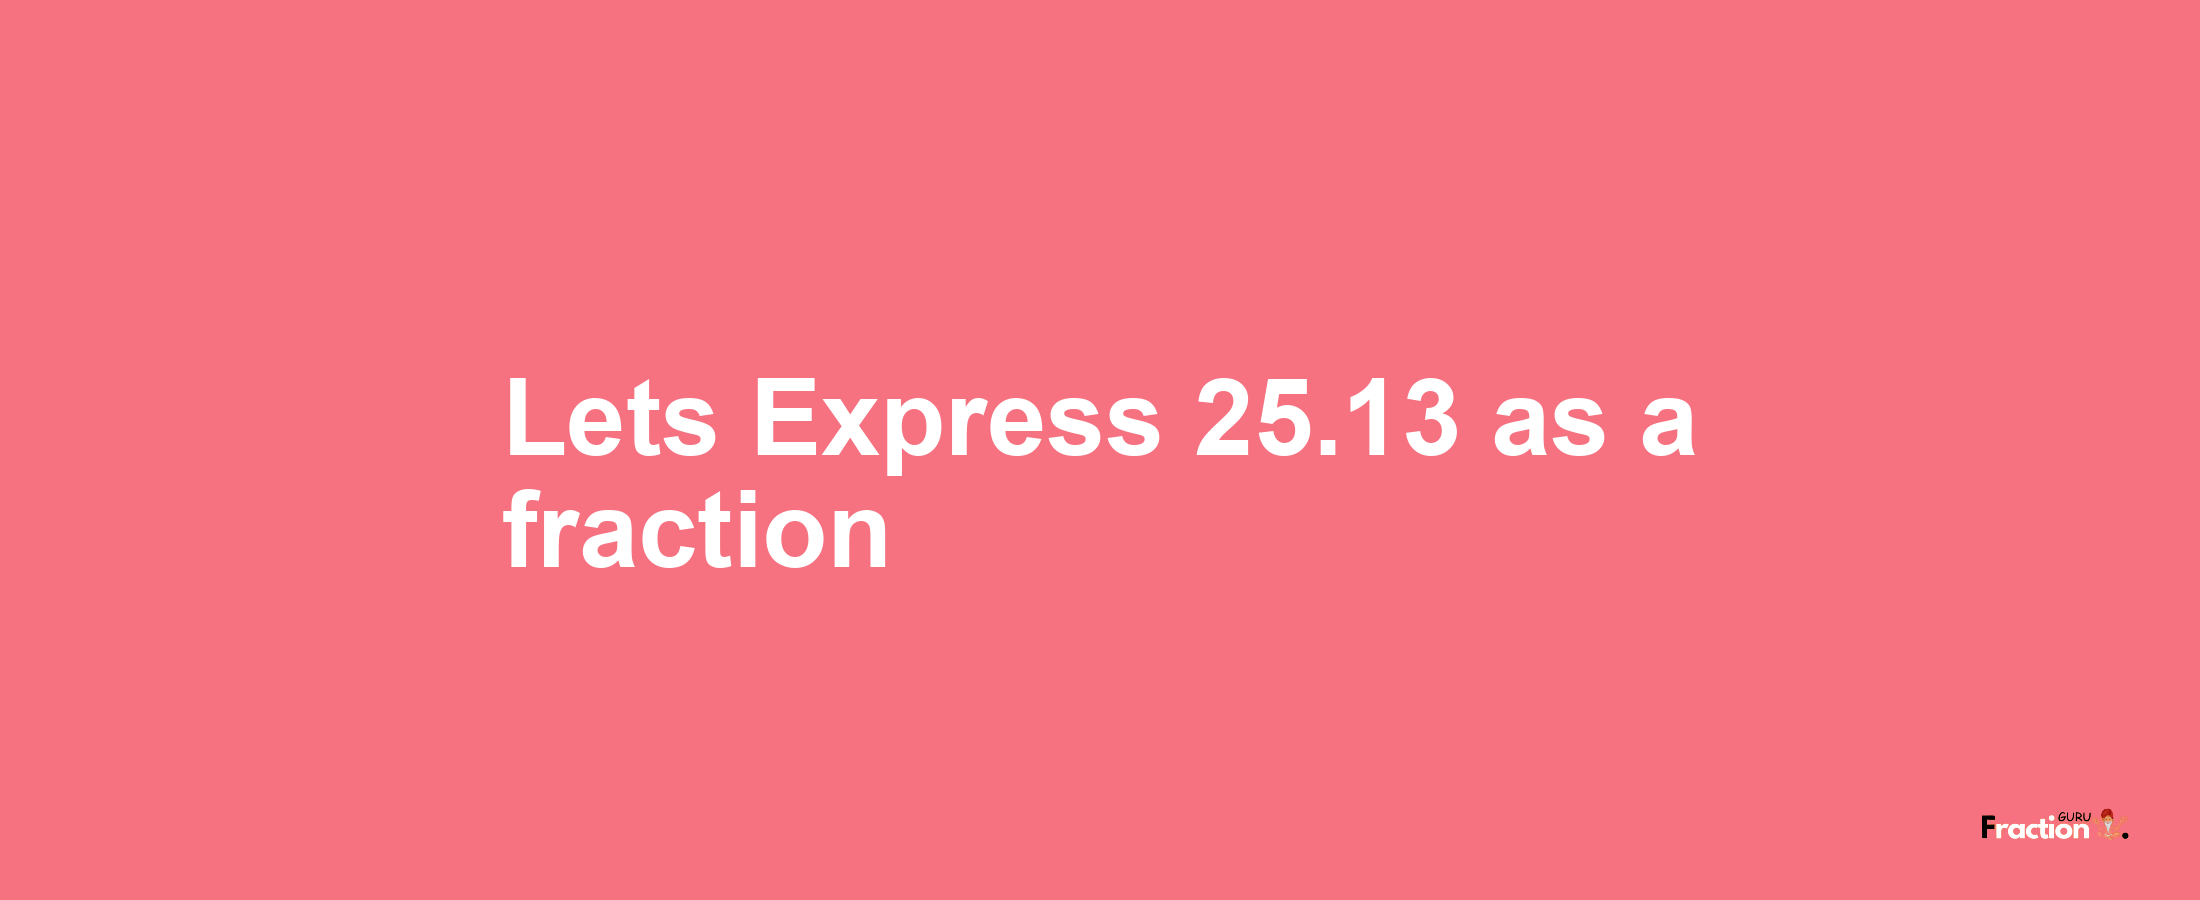 Lets Express 25.13 as afraction